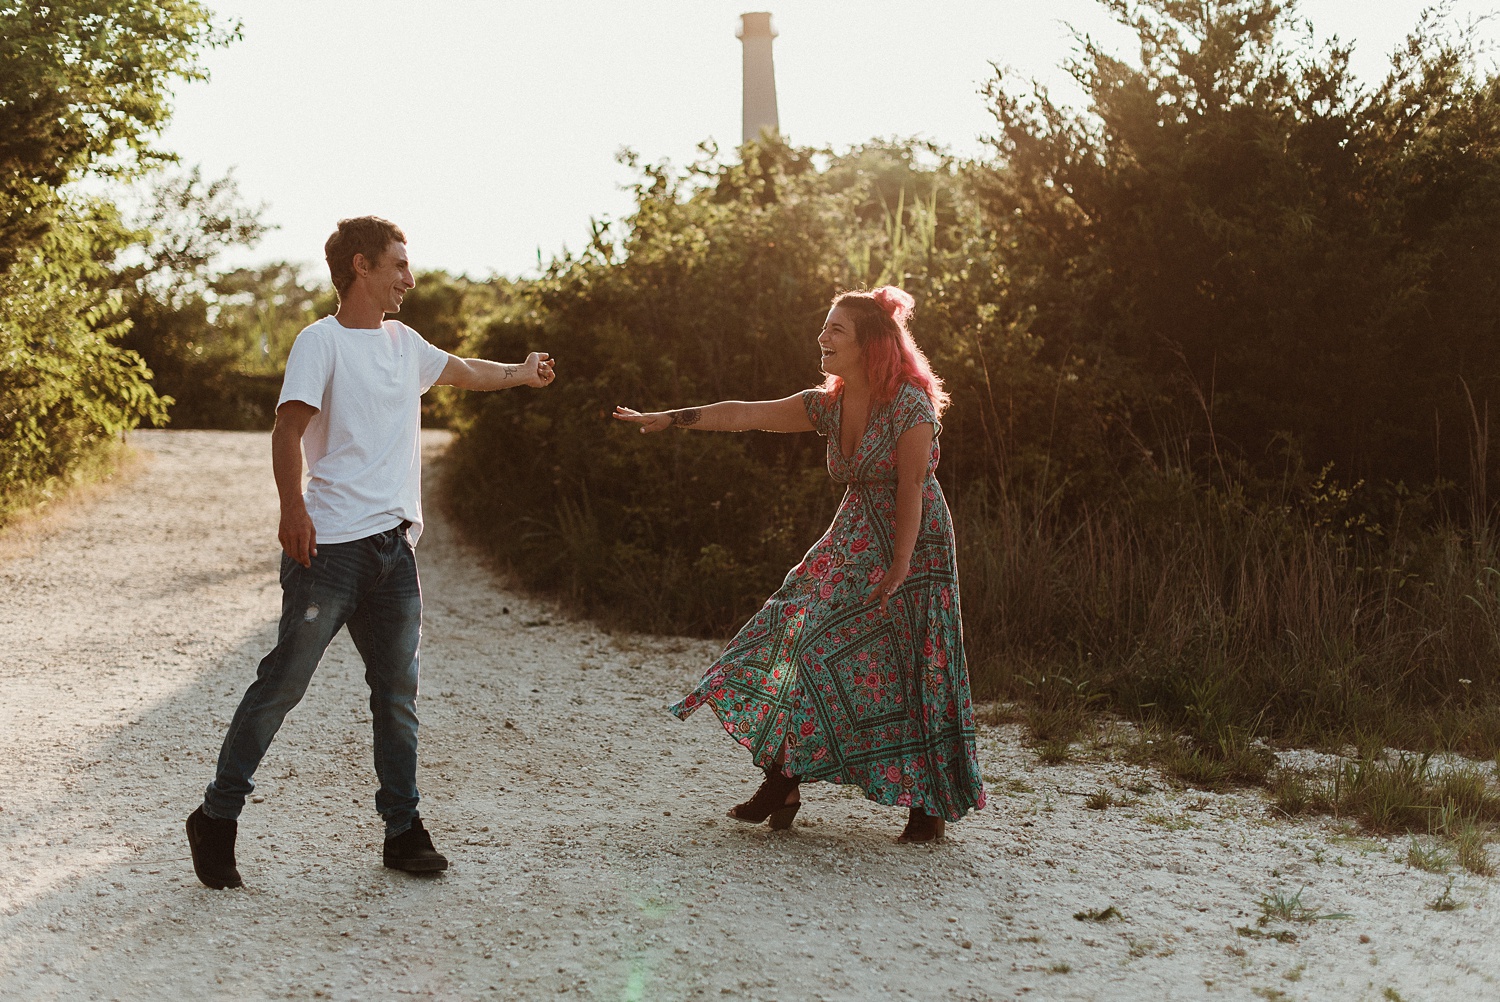 capemay-engagementsession_0012.jpg